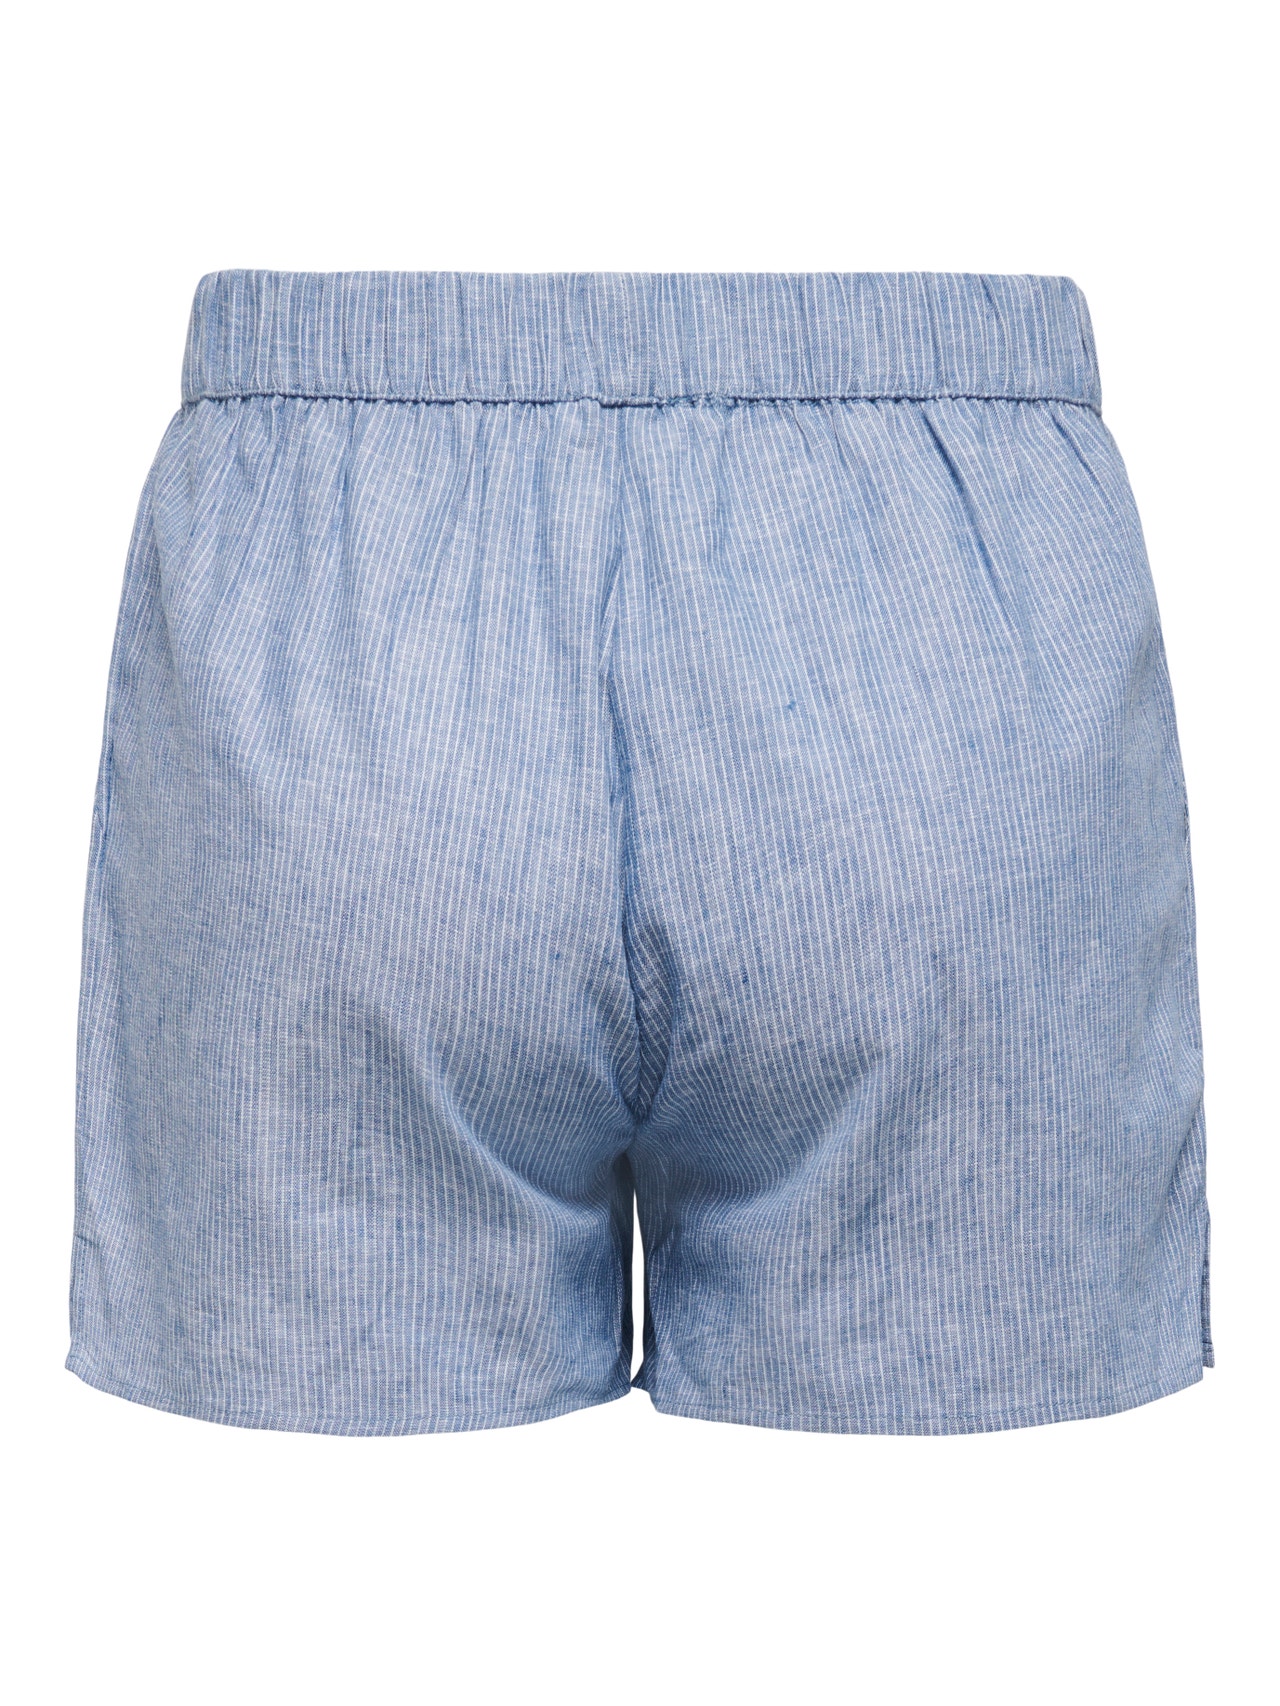 ONLY Normal passform Shorts -Dresden Blue - 15297034